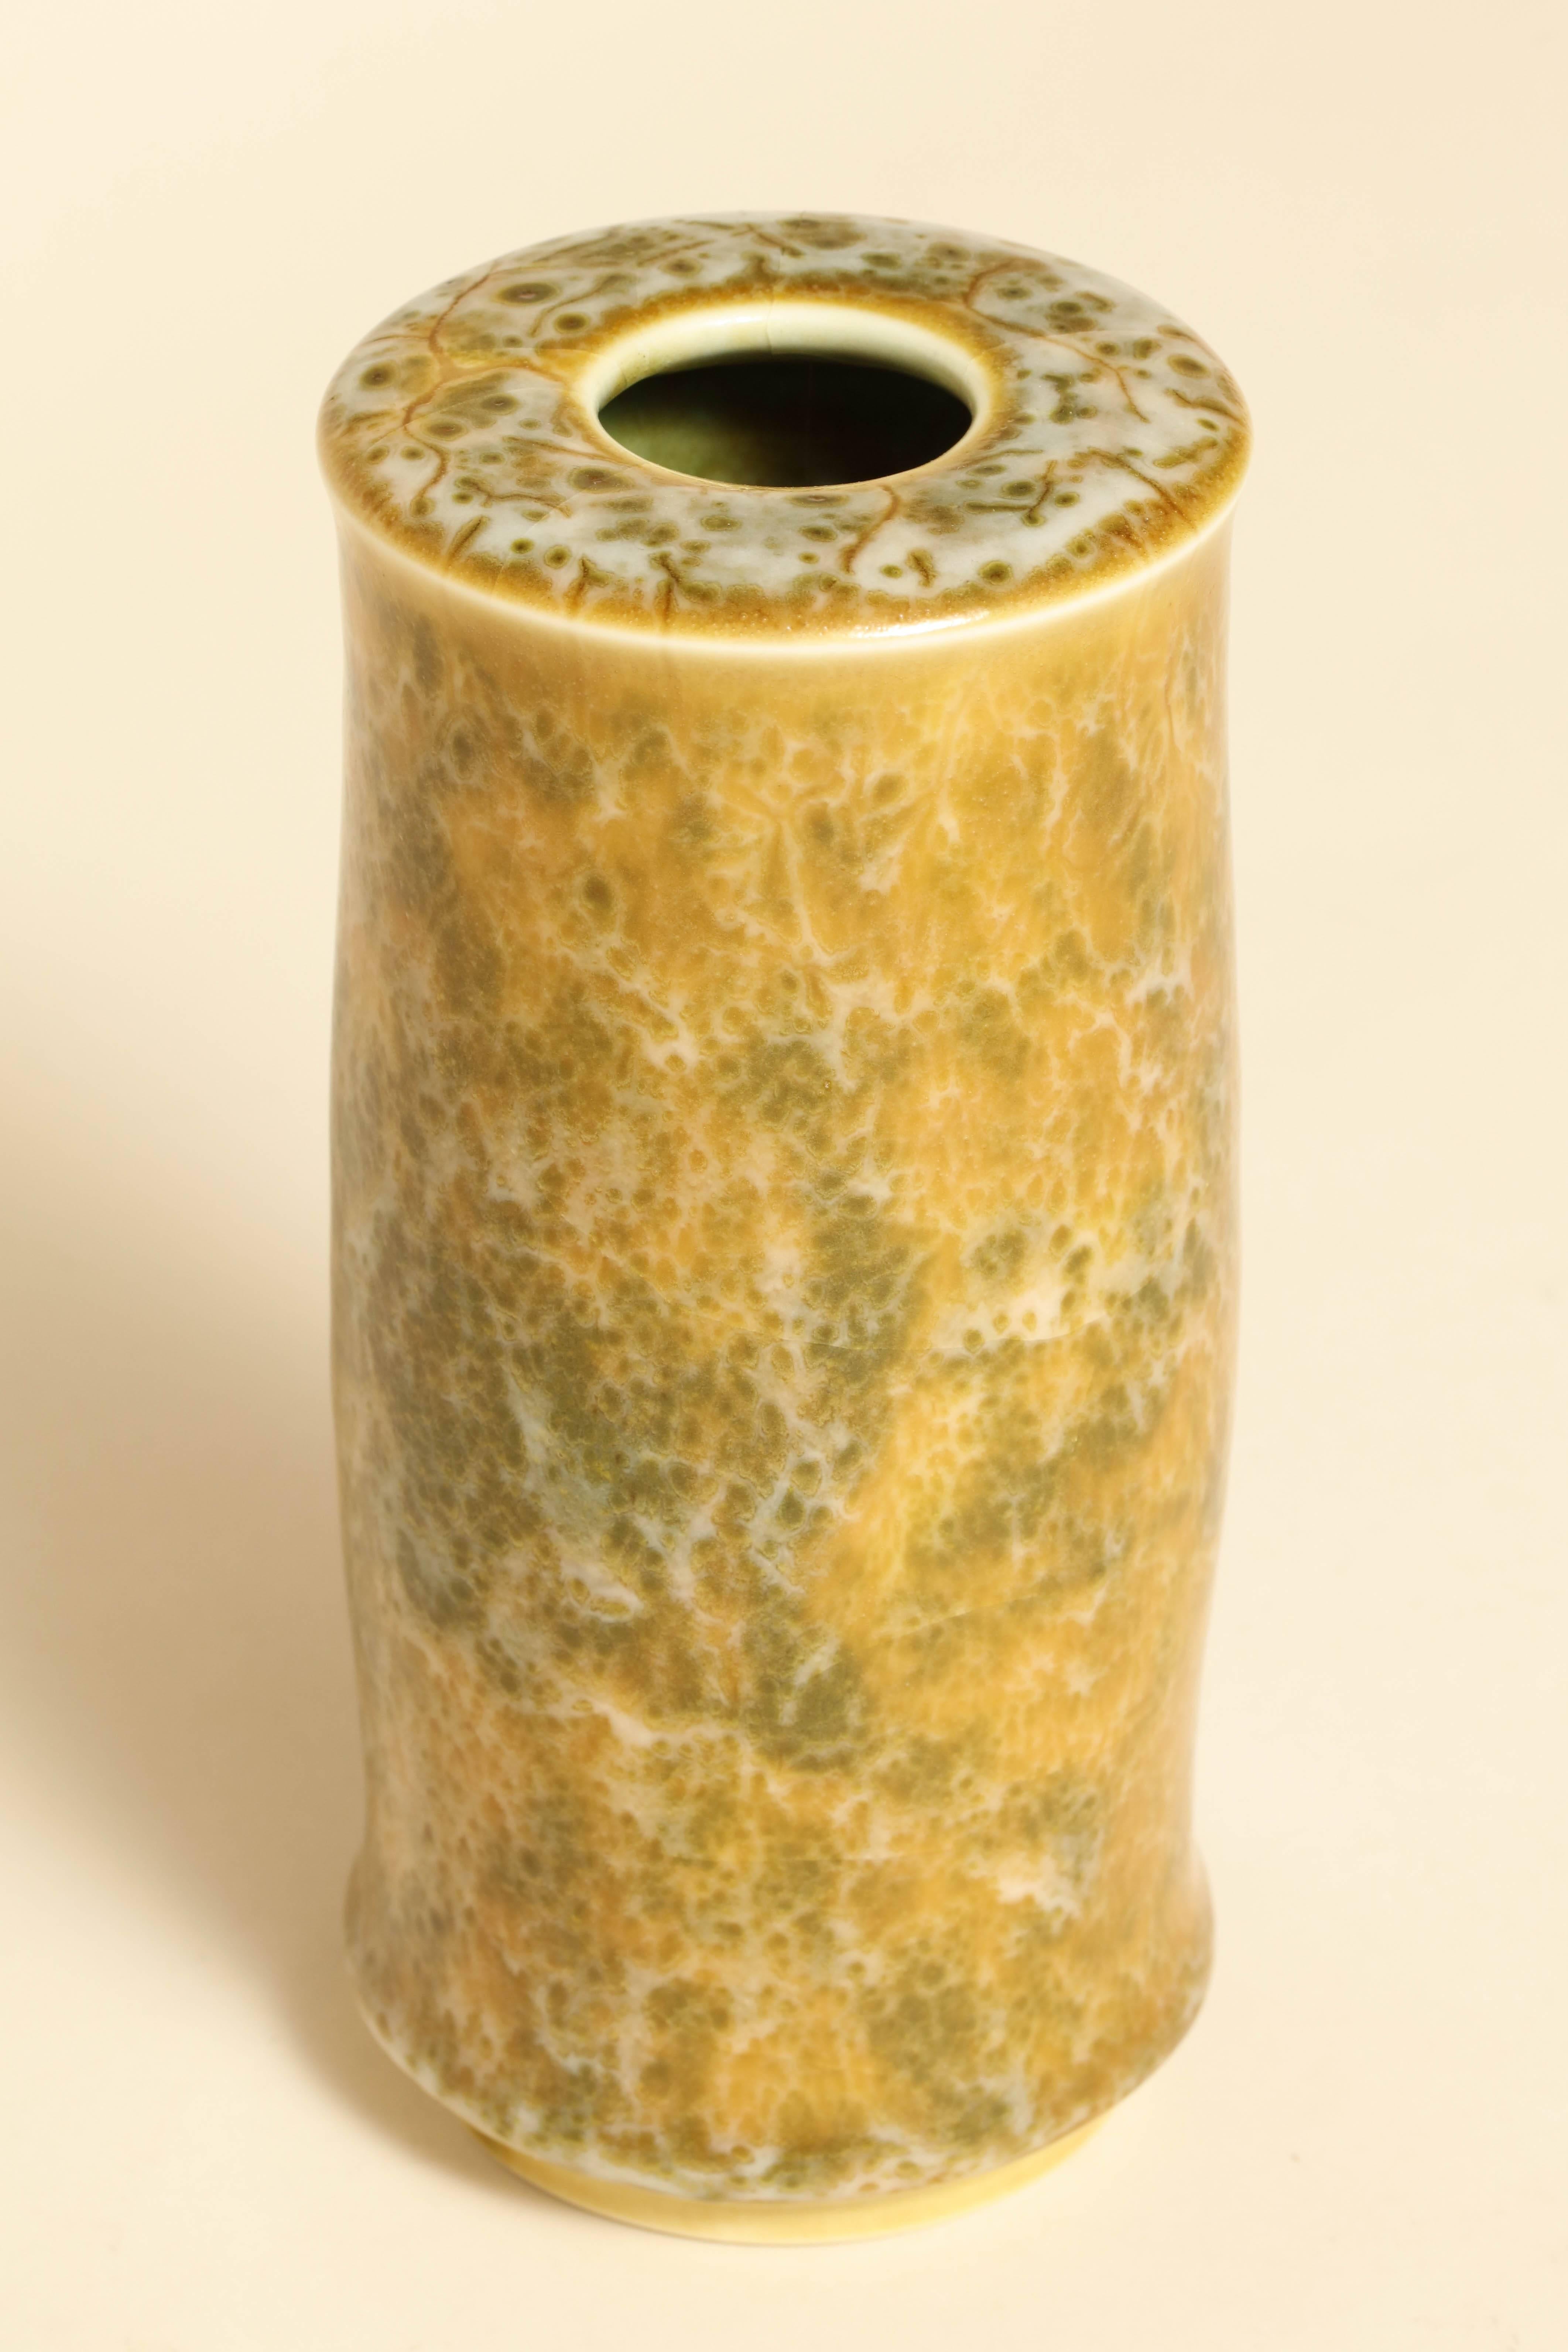 Stoneware cylindrical vase with projections and with mottled yellow ochre, green and white glaze.
Signature incised Maurice Gensoli underneath.
 